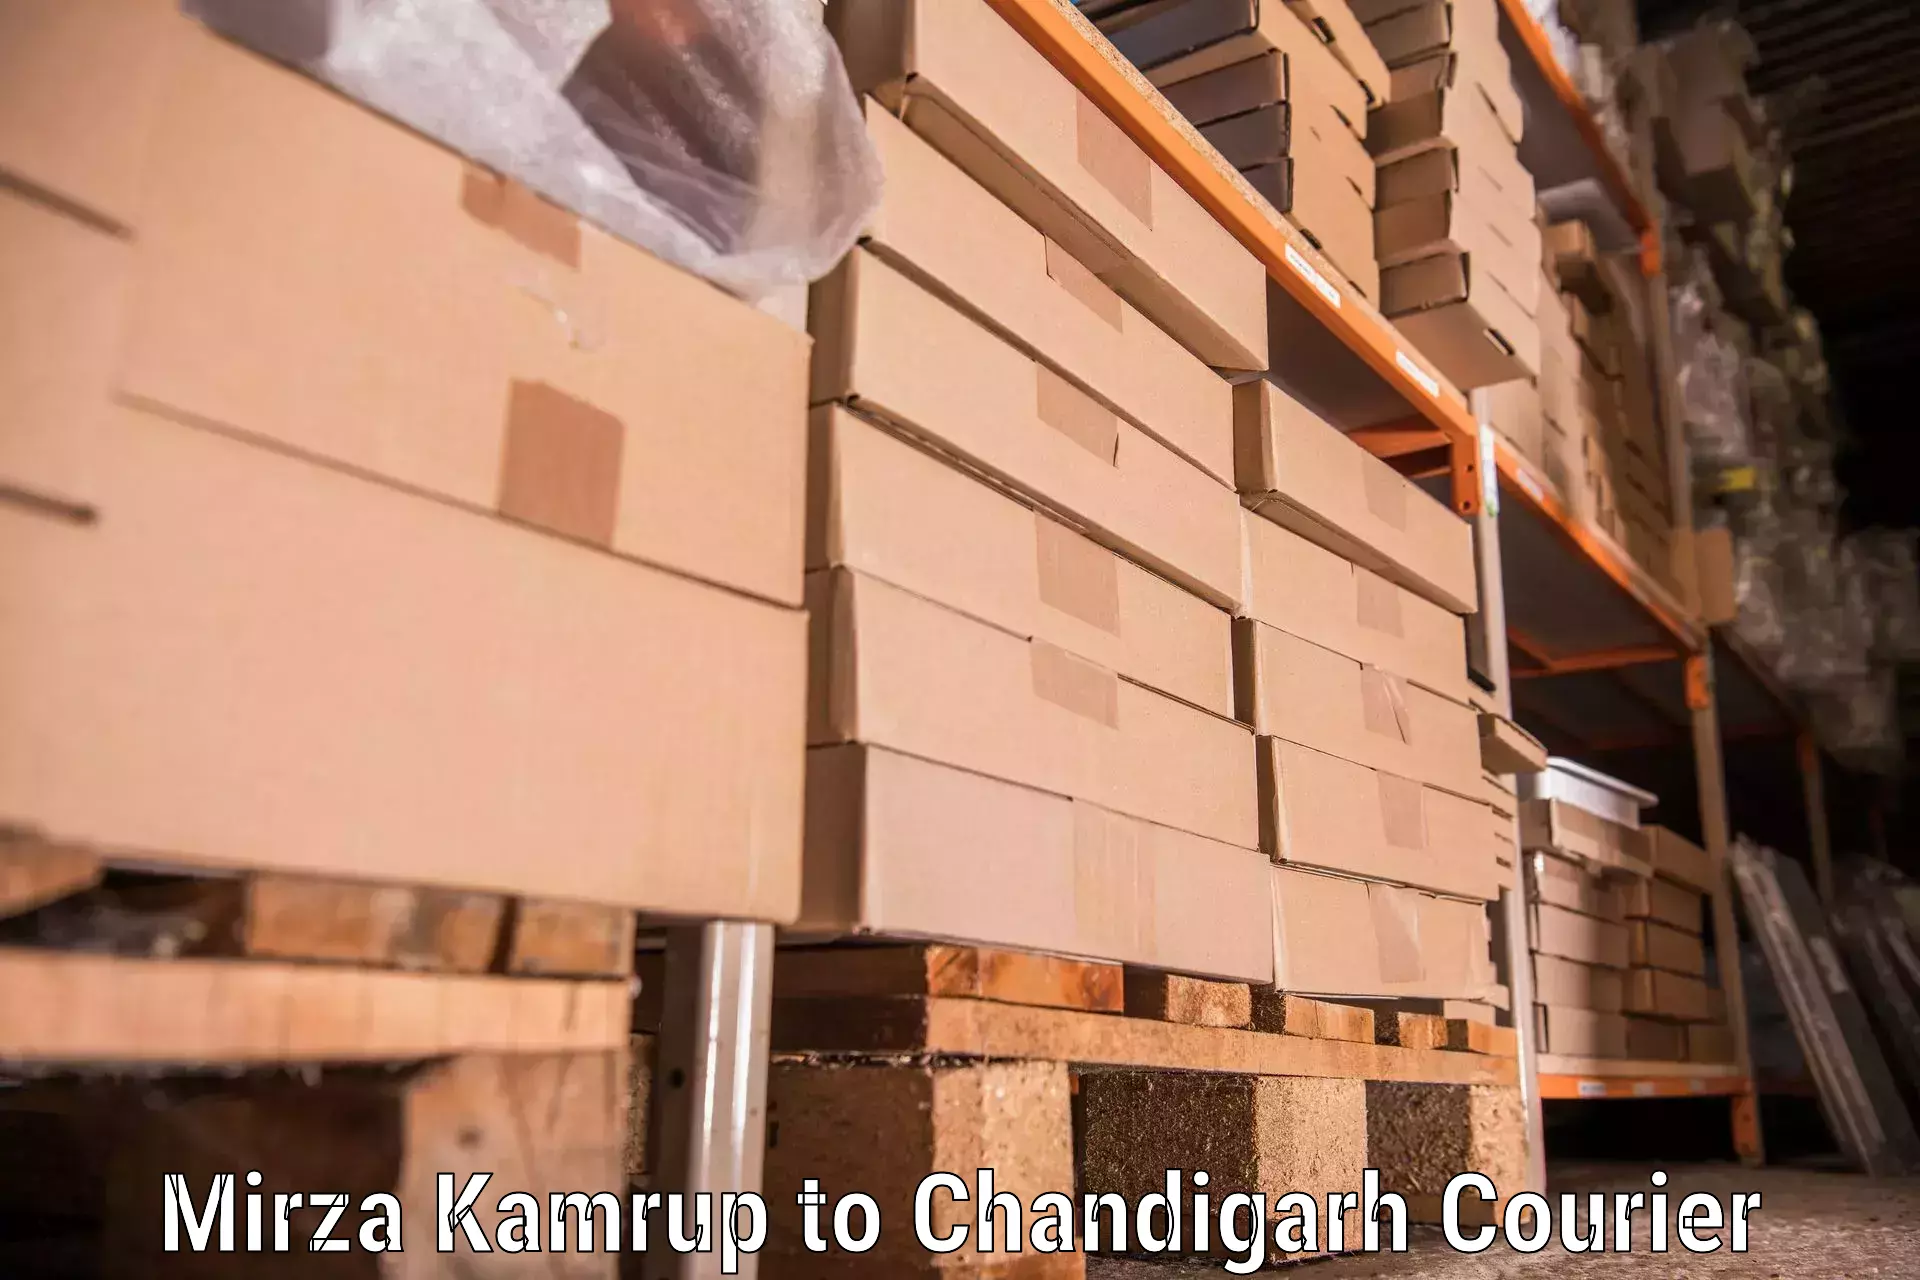 Moving and packing experts Mirza Kamrup to Chandigarh